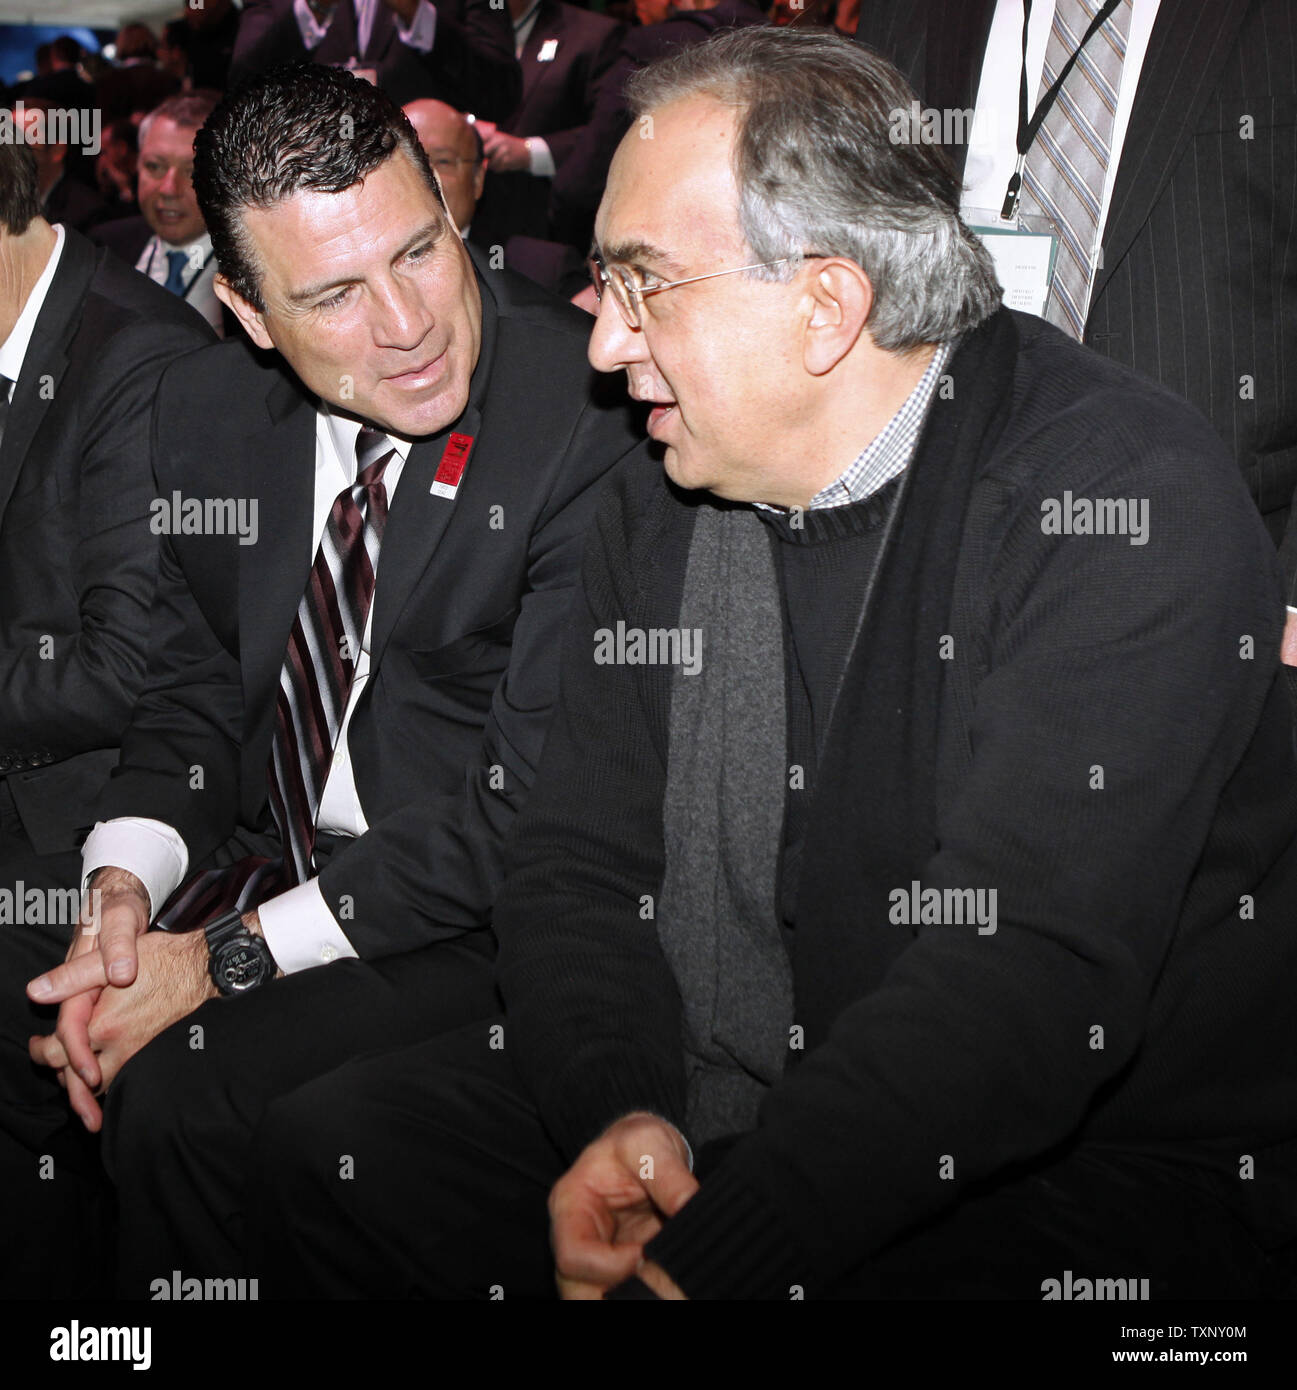 Reid Bigland, President and CEO of Dodge, left, talks with Sergio Marchionne, CEO of the Fiat Group and Chrysler before the Jeep presentation during the 2013 North American International Auto Show at the Cobo Center in Detroit, January 14, 2013. UPI/Mark Cowan Stock Photo